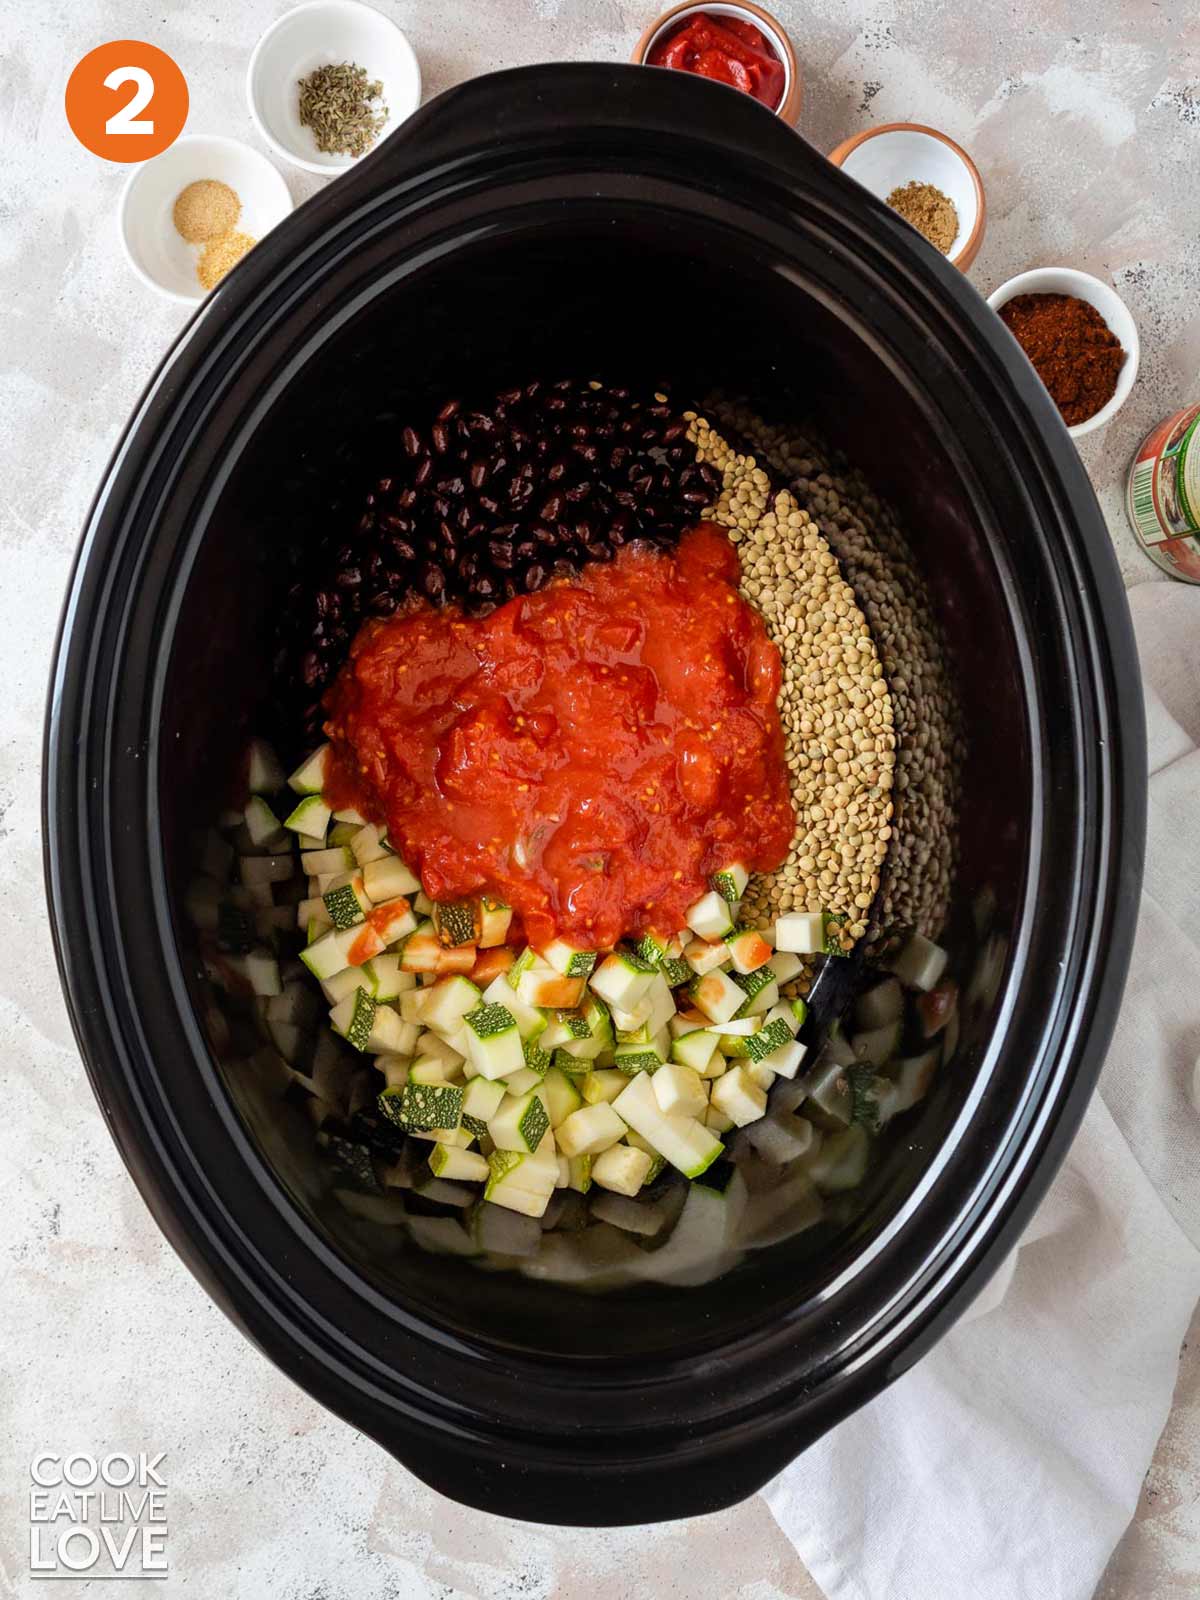 Tomatoes, zucchini, lentils and beans in a slow cooker.